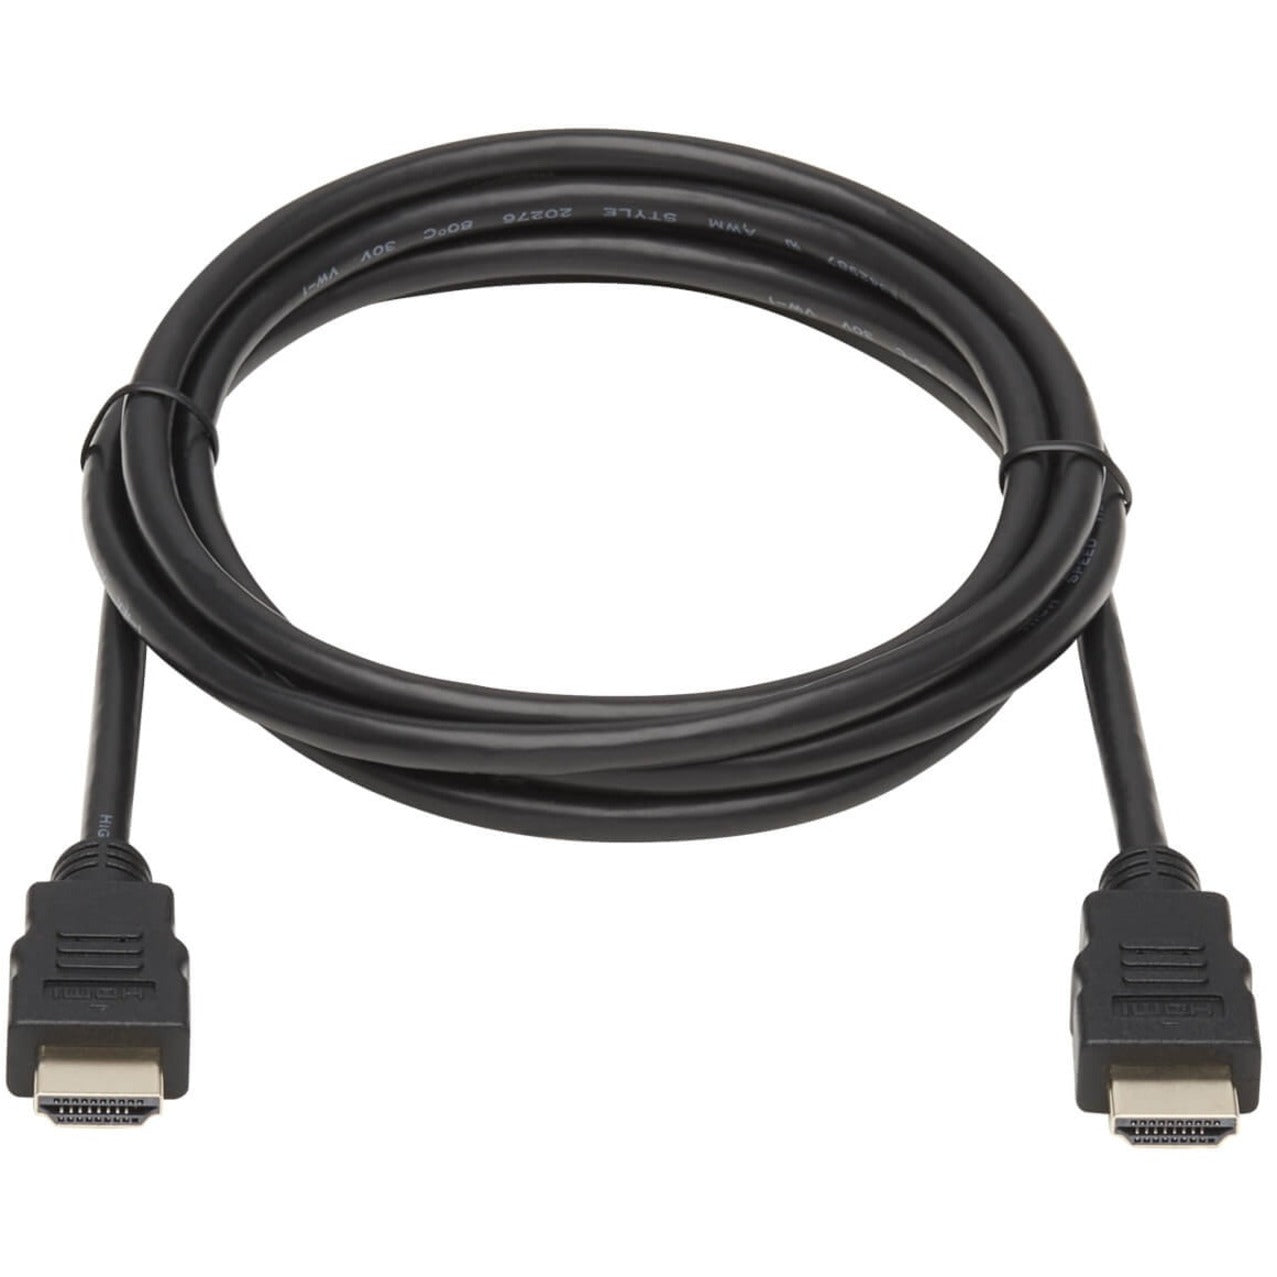 Tripp Lite P568-012 HDMI Cable, 12 ft, Gripping Connector, EMI/RF Protection